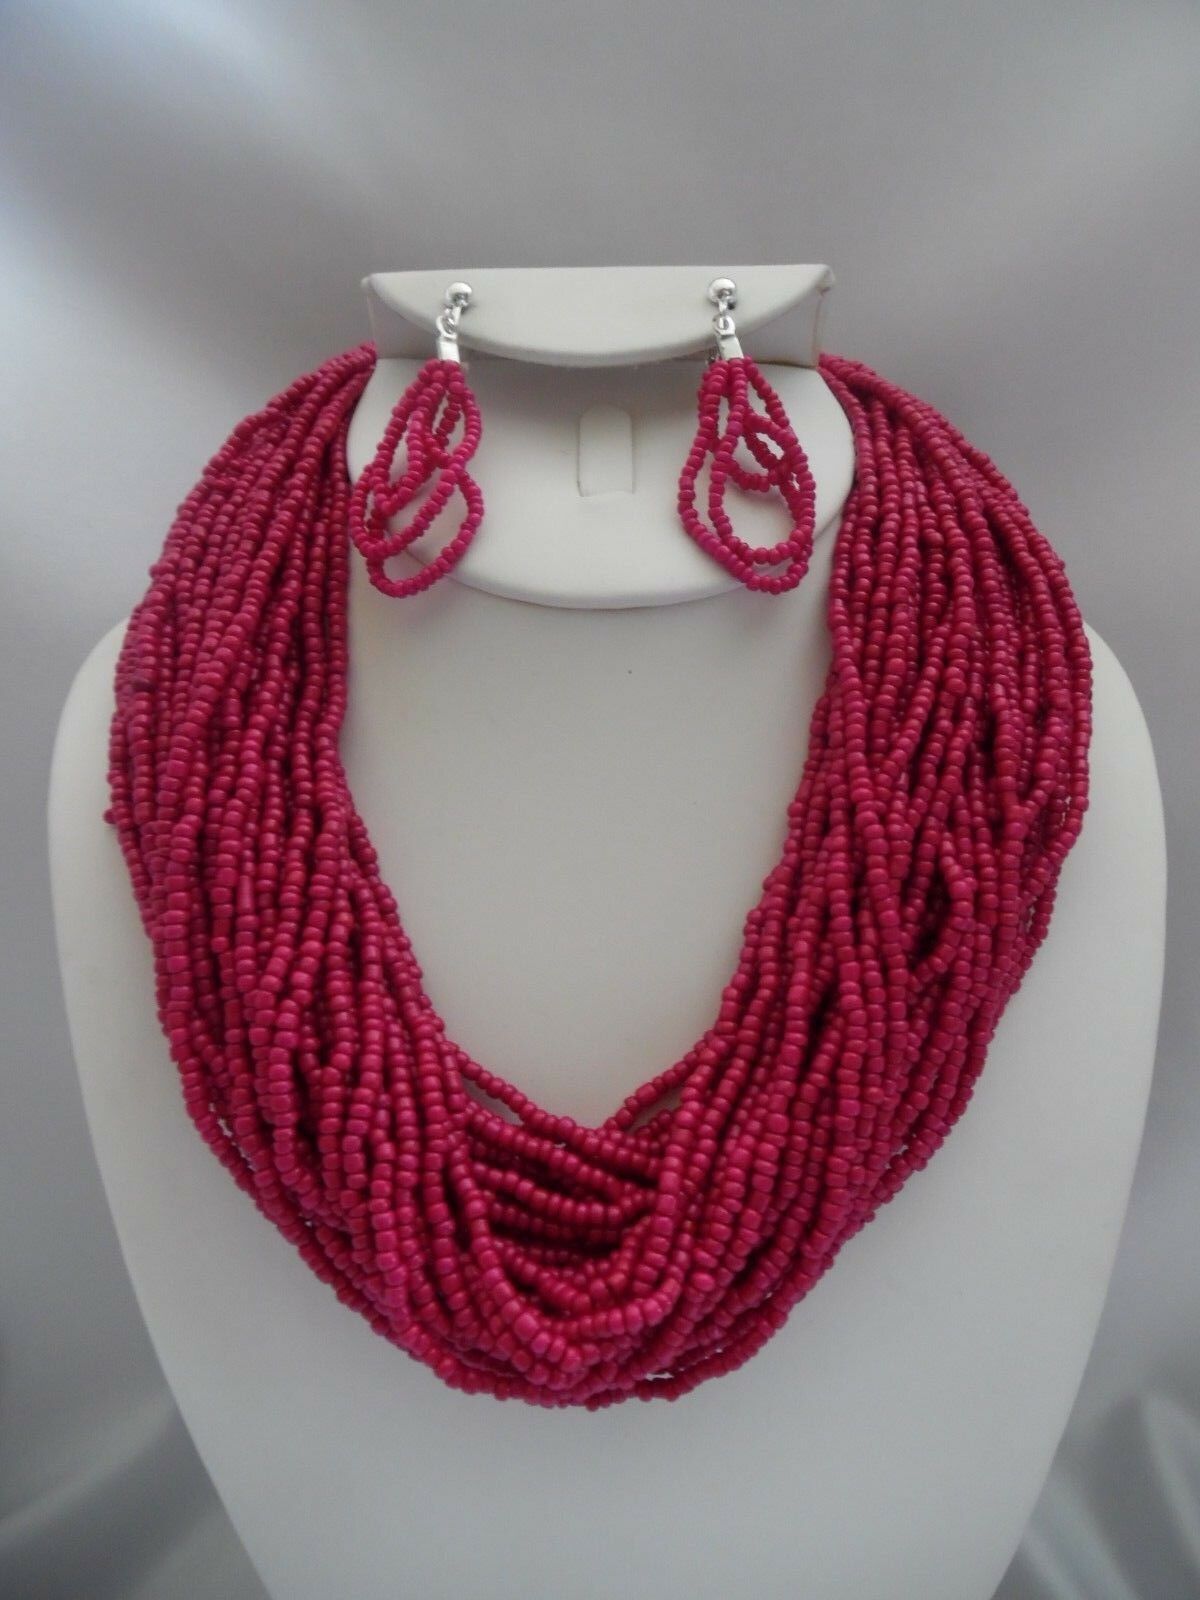 Pierced Multi Layered Pink Seed Bead Necklace Earrings Set